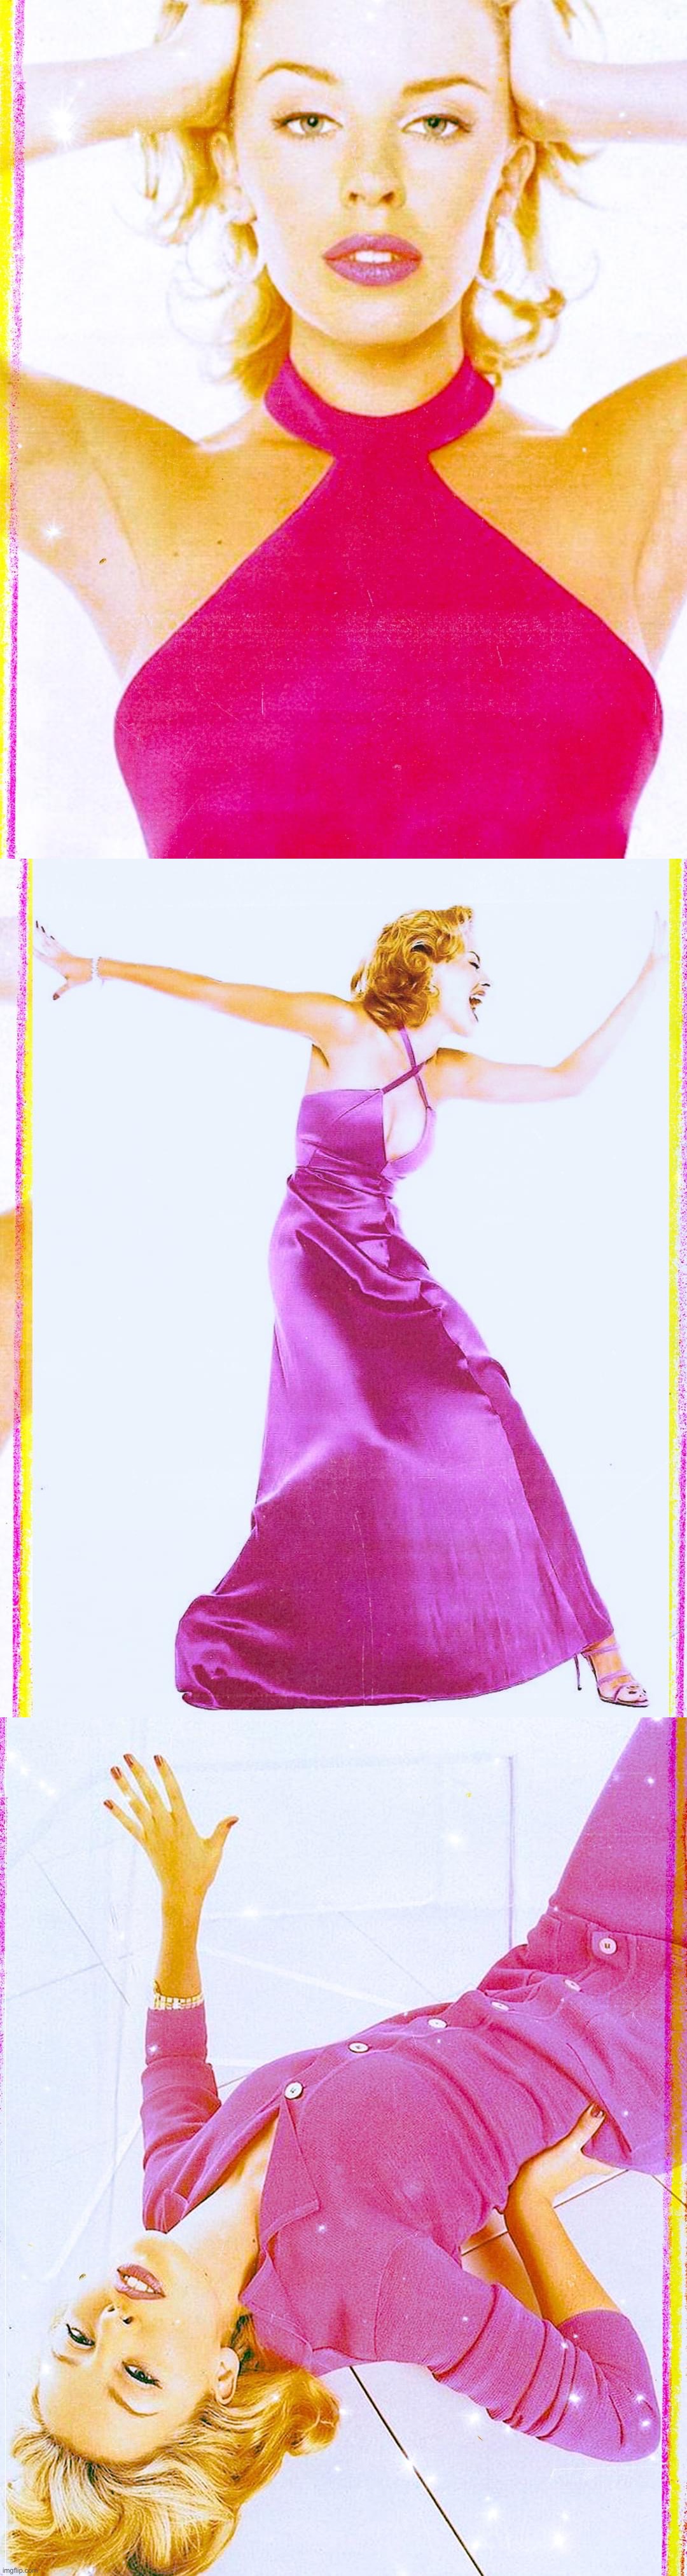 image tagged in kylie minogue pink | made w/ Imgflip meme maker